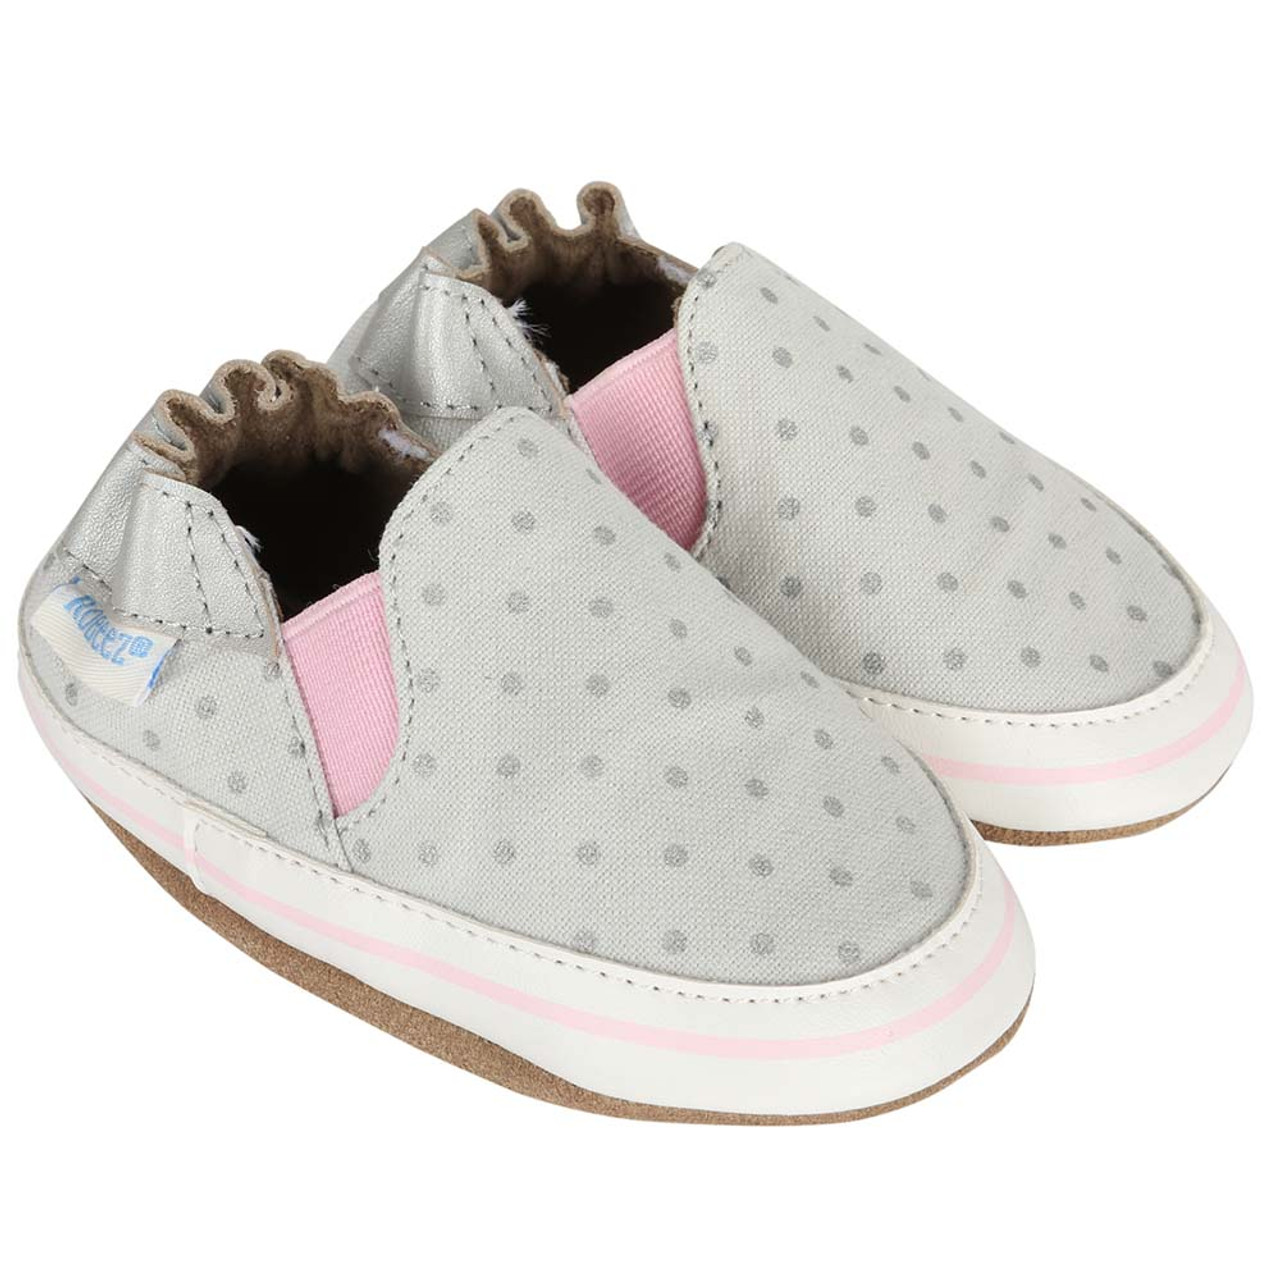 baby shoes moccasins 12 18 month